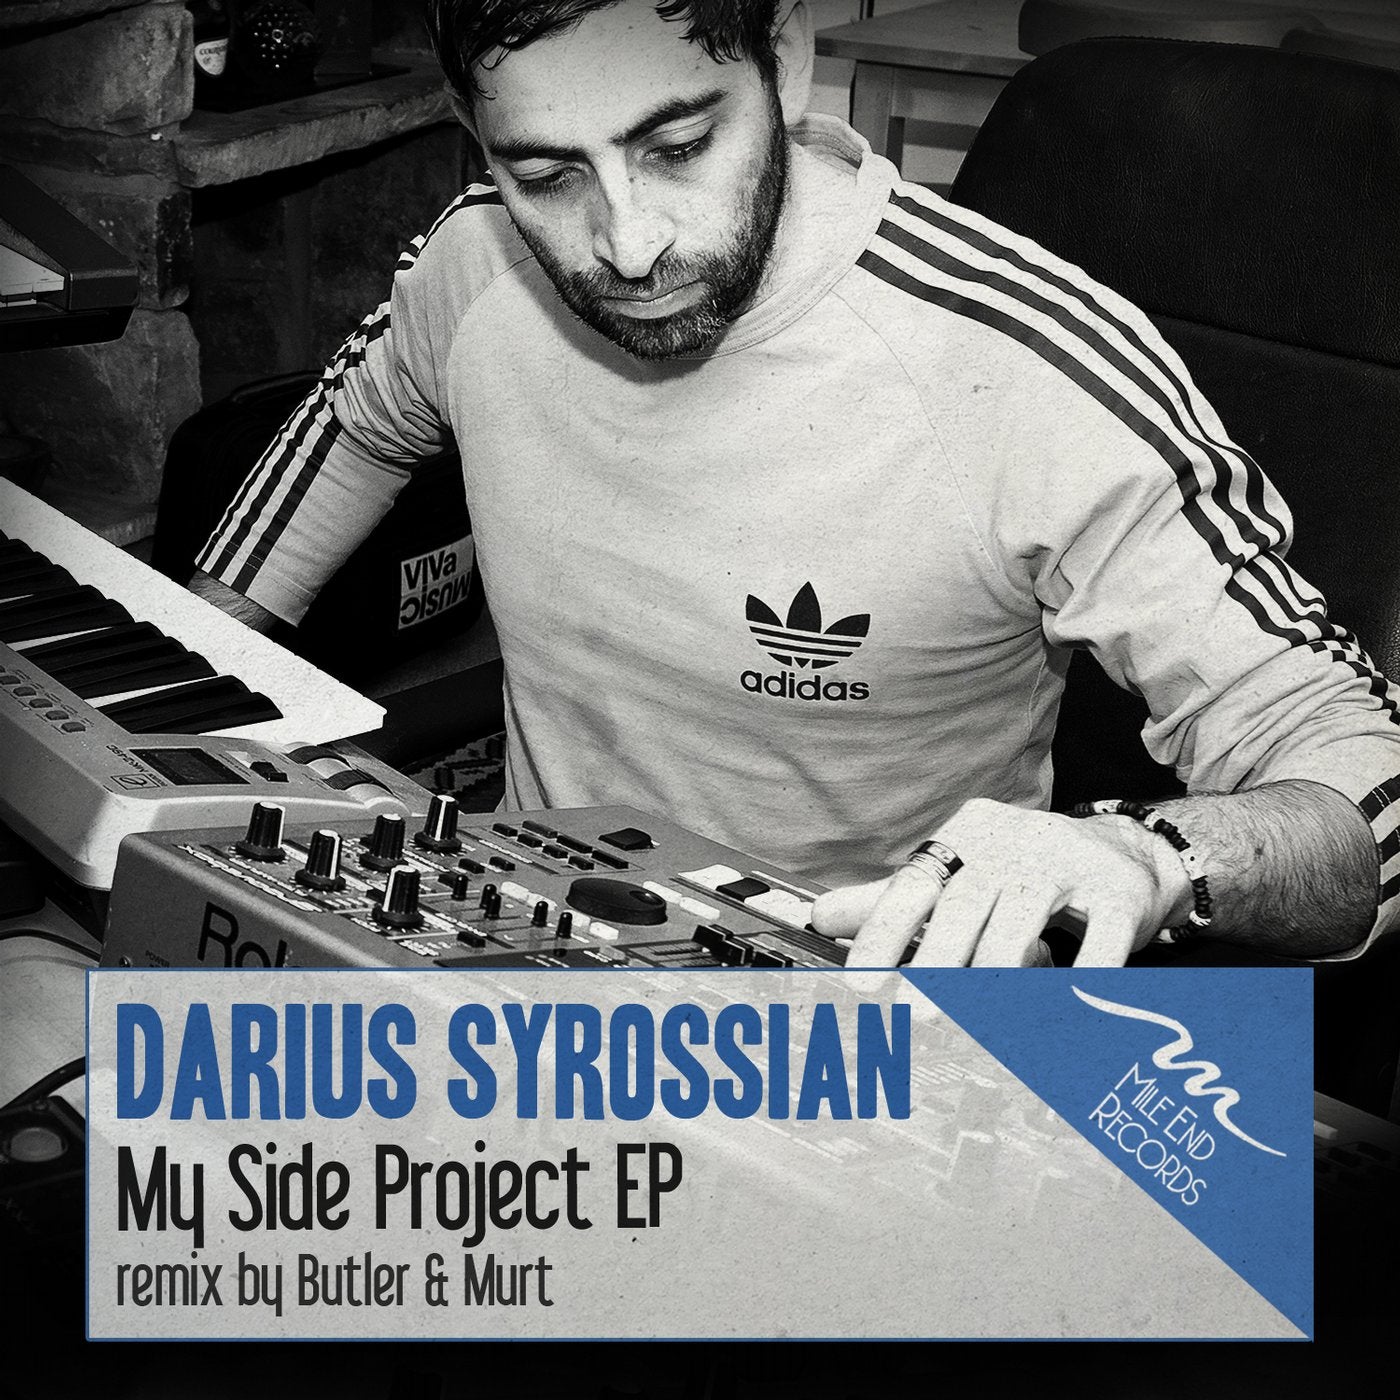 Darius Syrossian. Darius Syrossian Wiki. Darius Syrossian - White Rabbit картинка. Darius Syrossian - sonido Ep Cover. Side projects